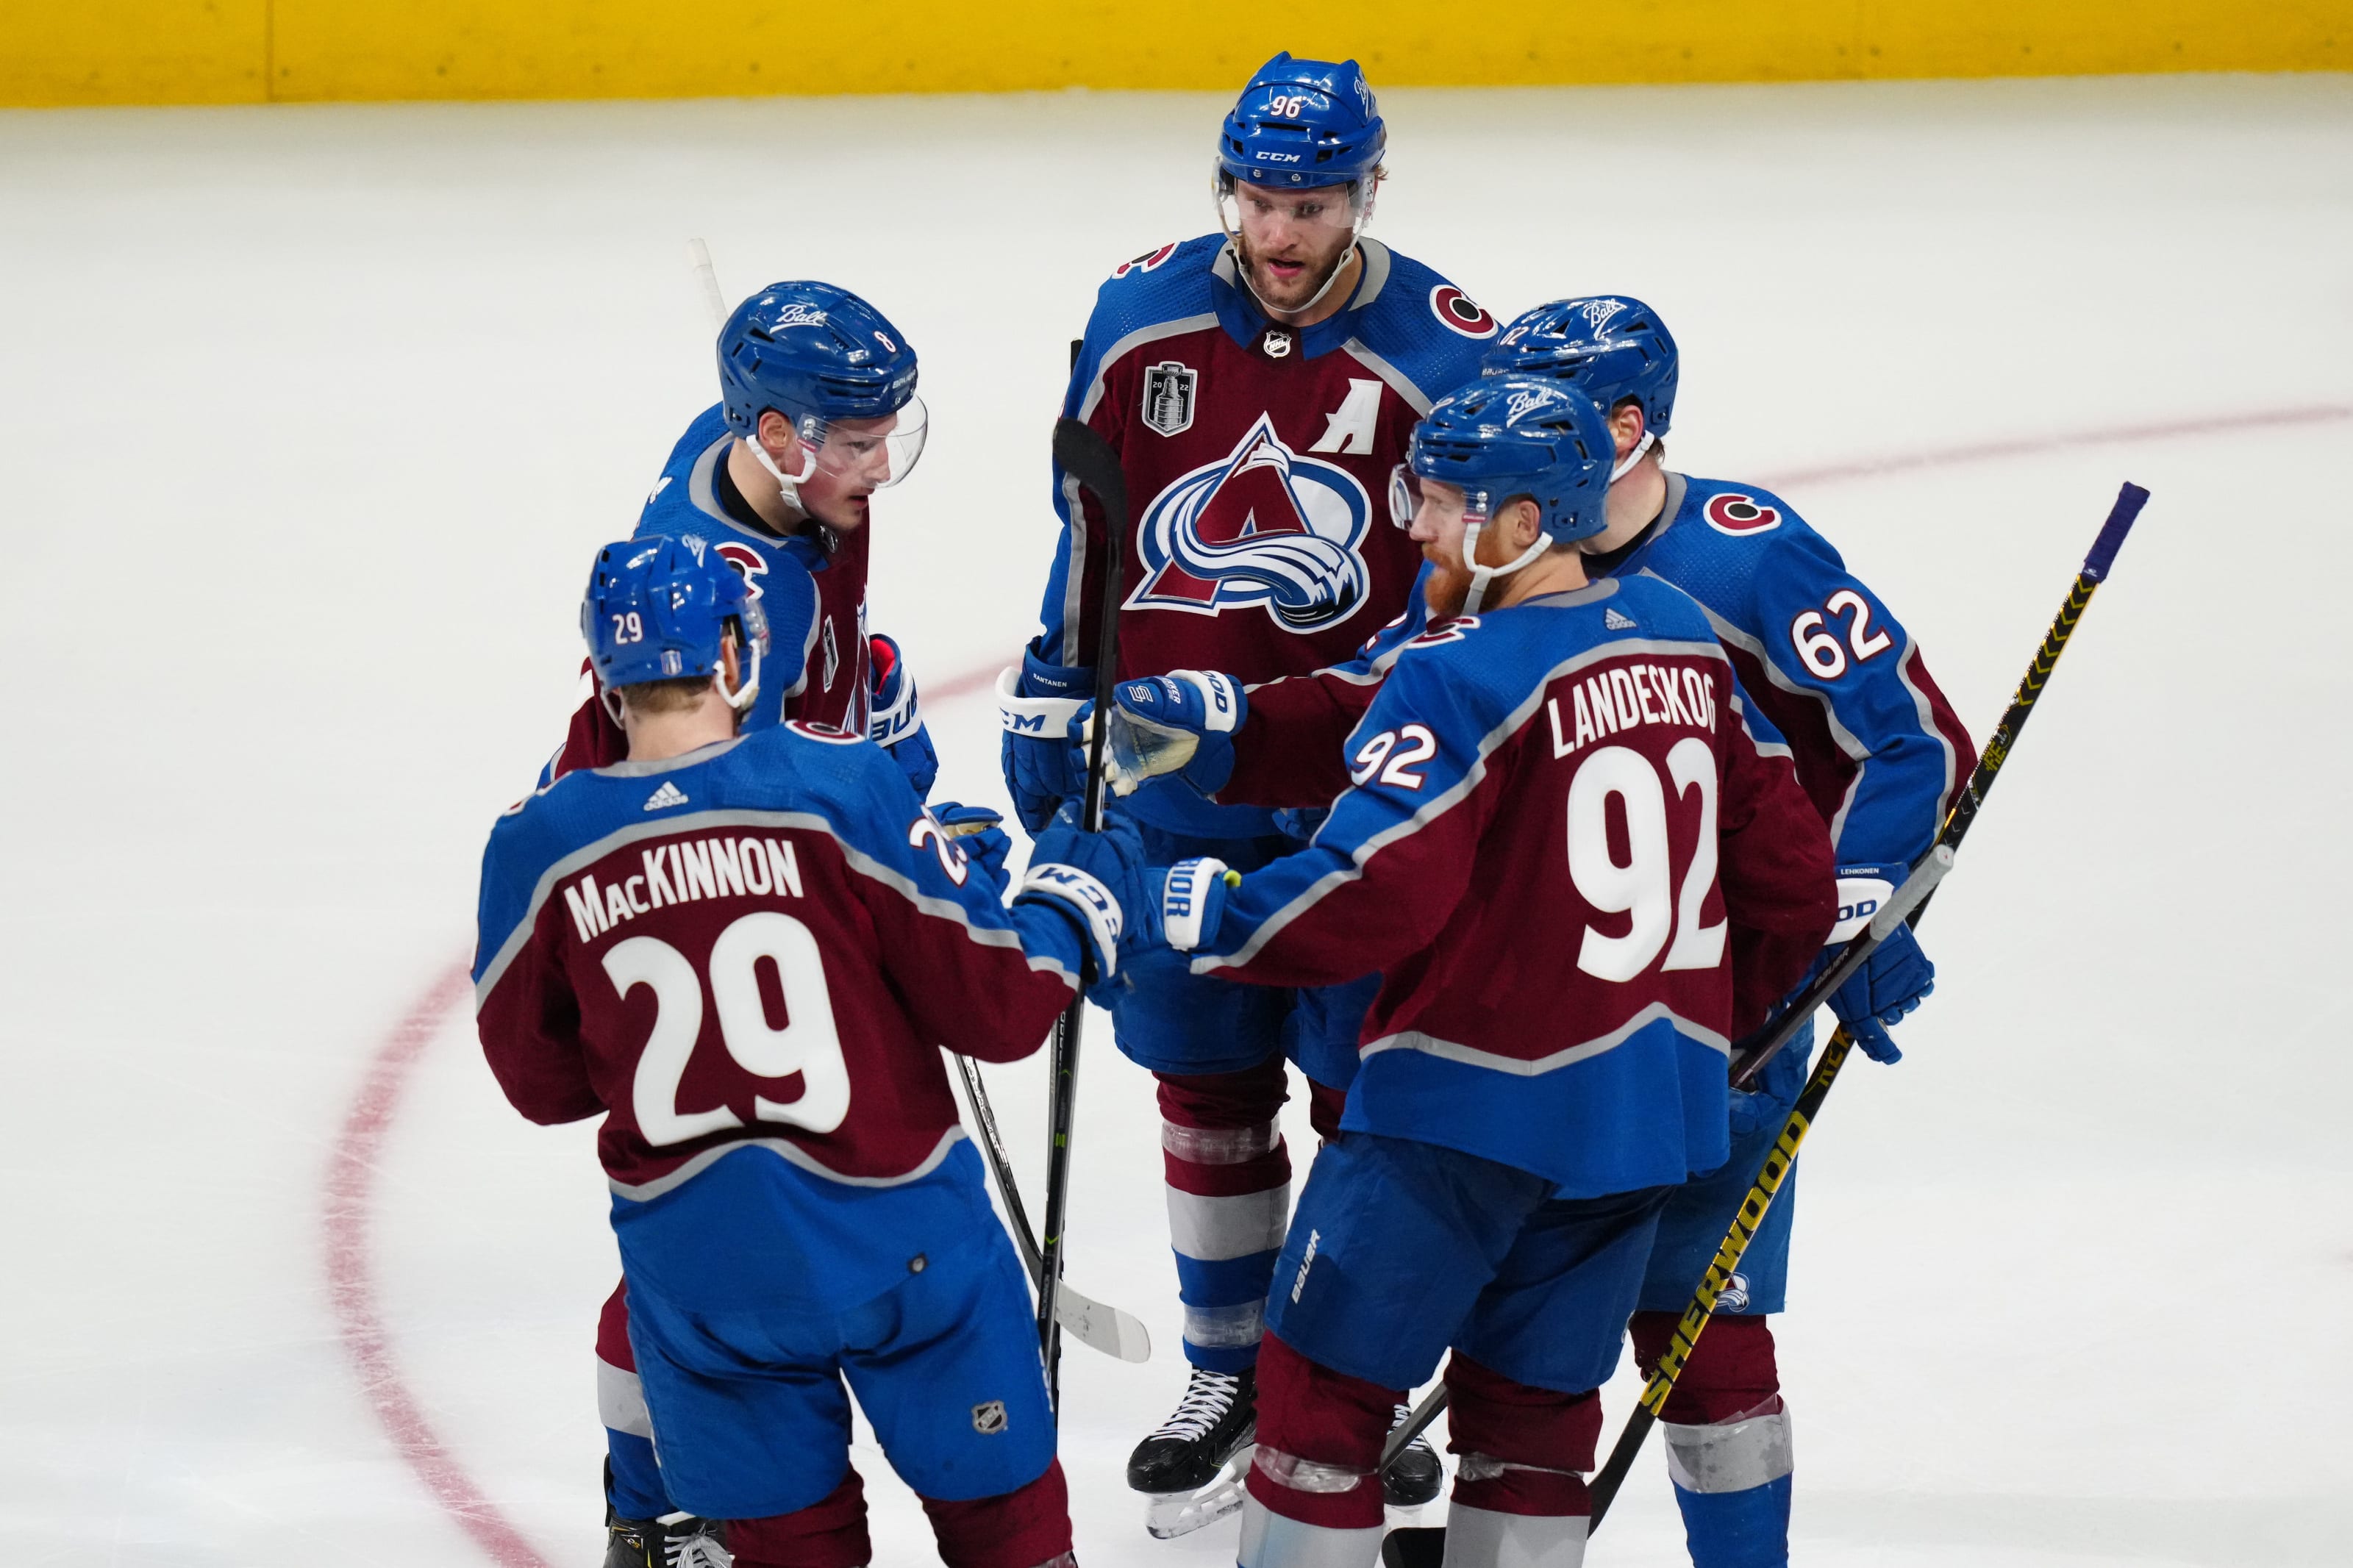 Colorado Avalanche 3 storylines from Game 2 victory